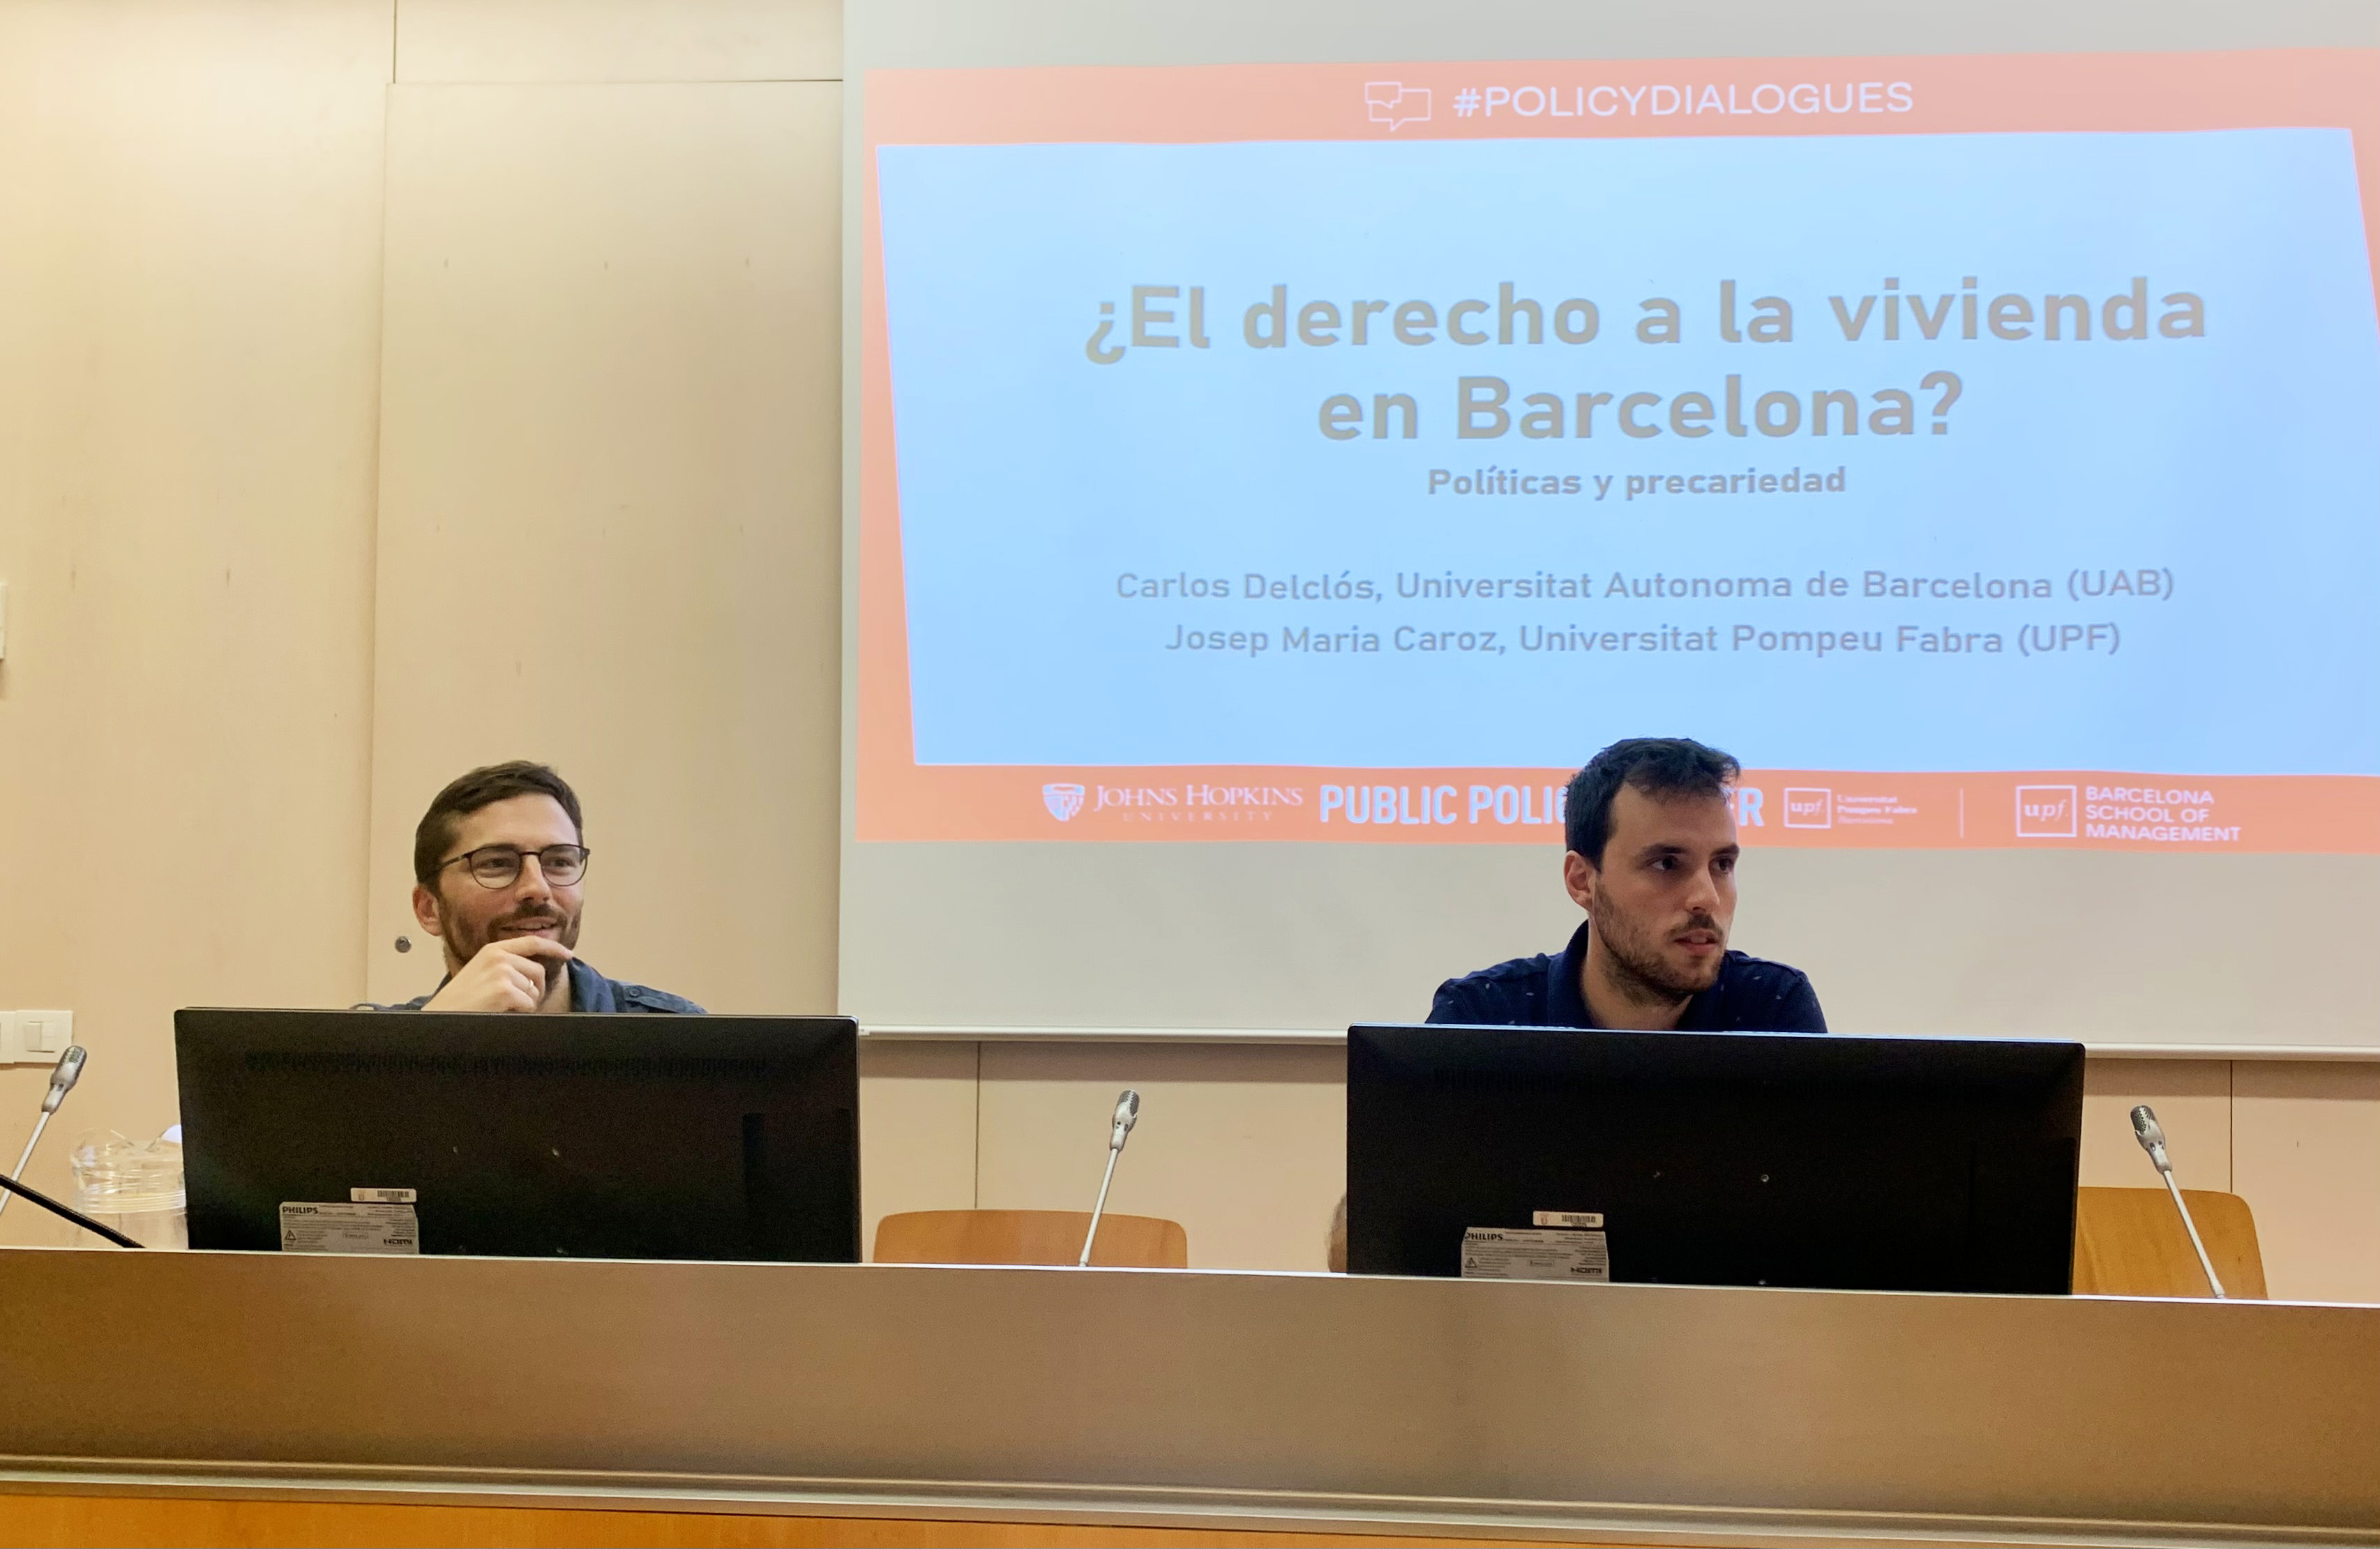 “Housing is at the centre of social policies”. Report of the twelfth edition of the Policy Dialogues series